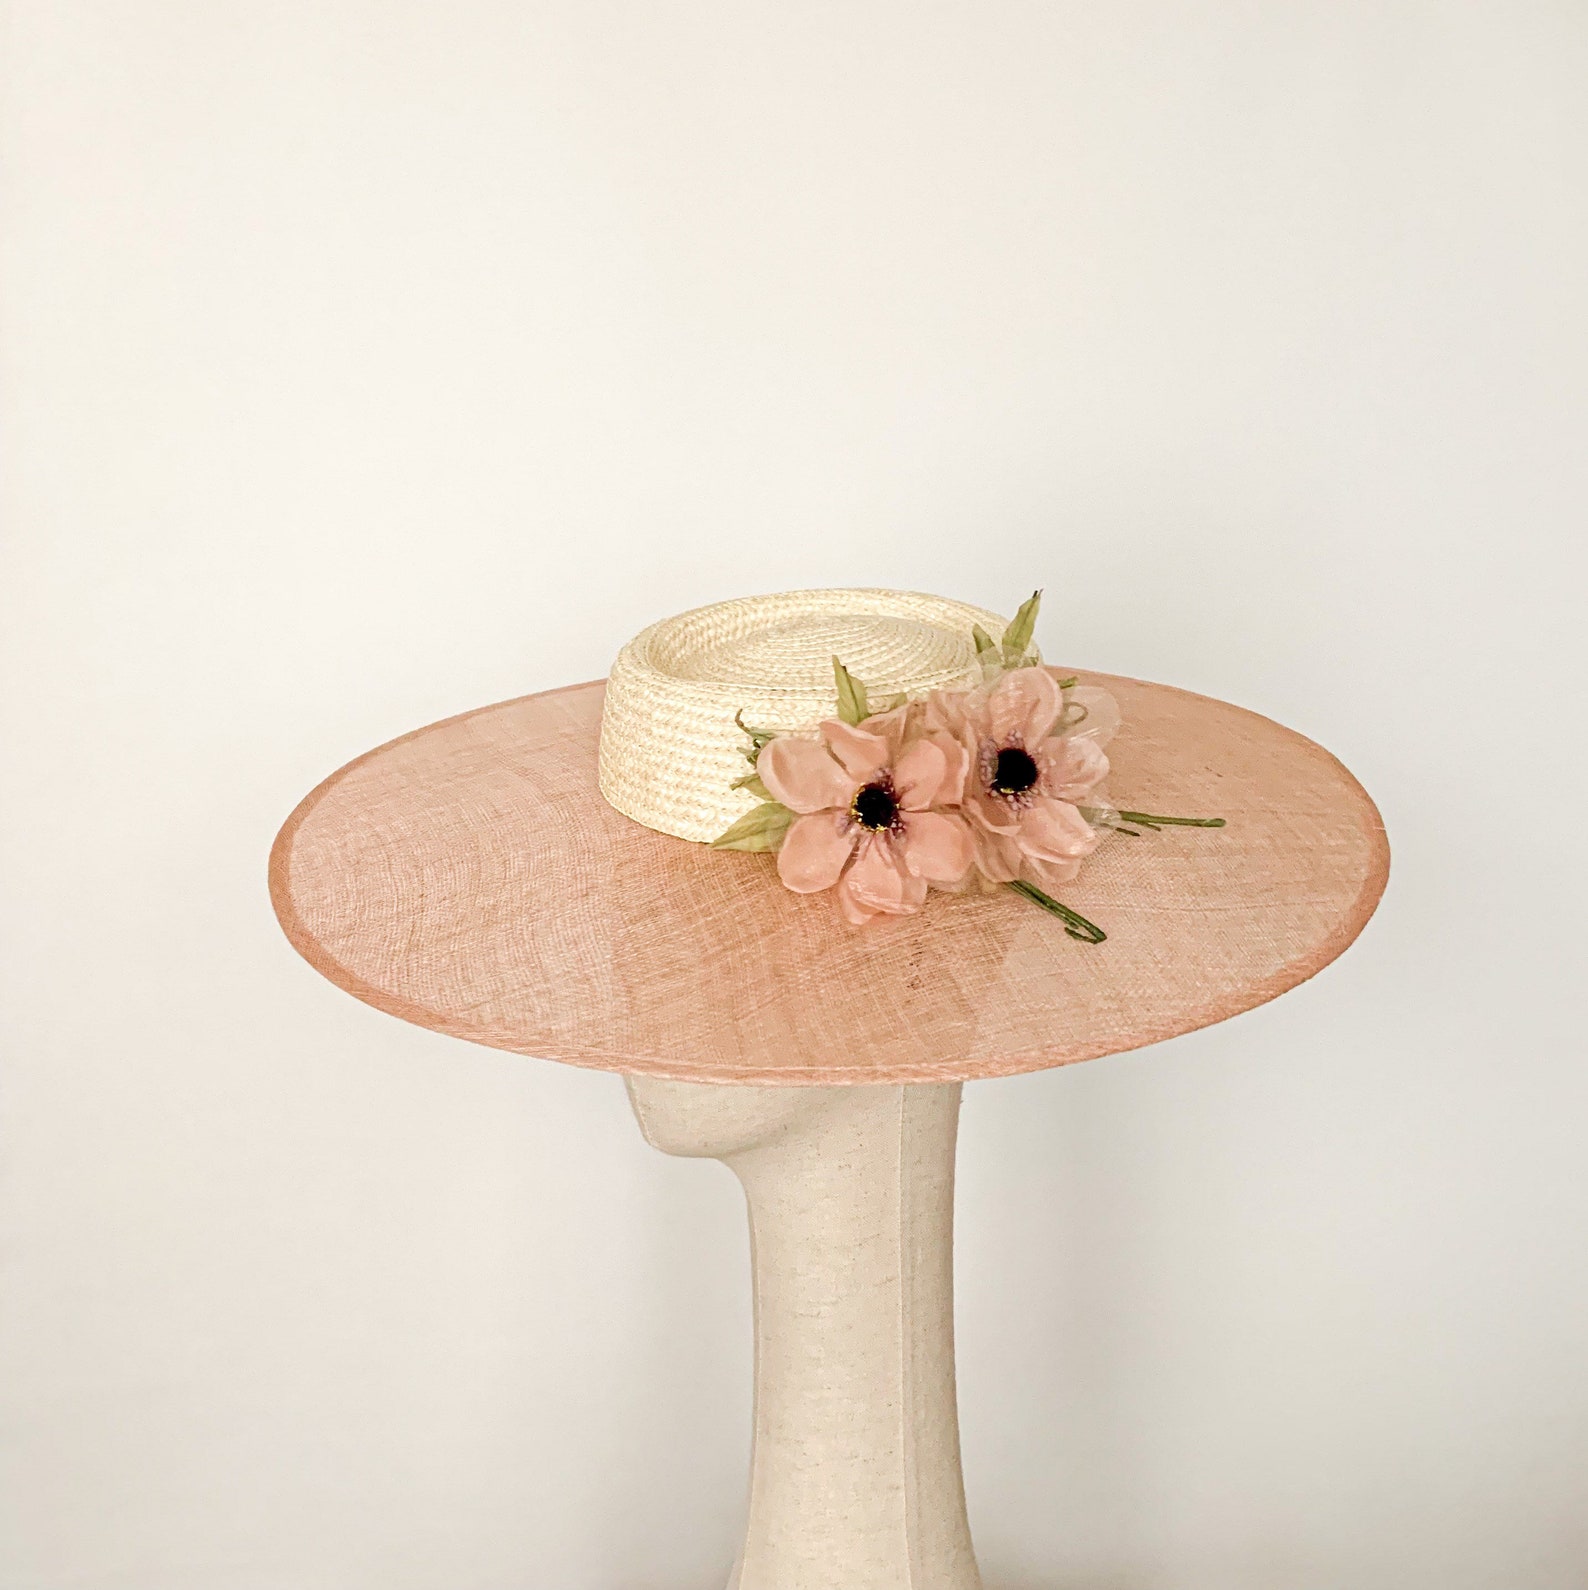 Kentucky Derby Hat off White Derby Hat Pink Royal Ascot Hat - Etsy